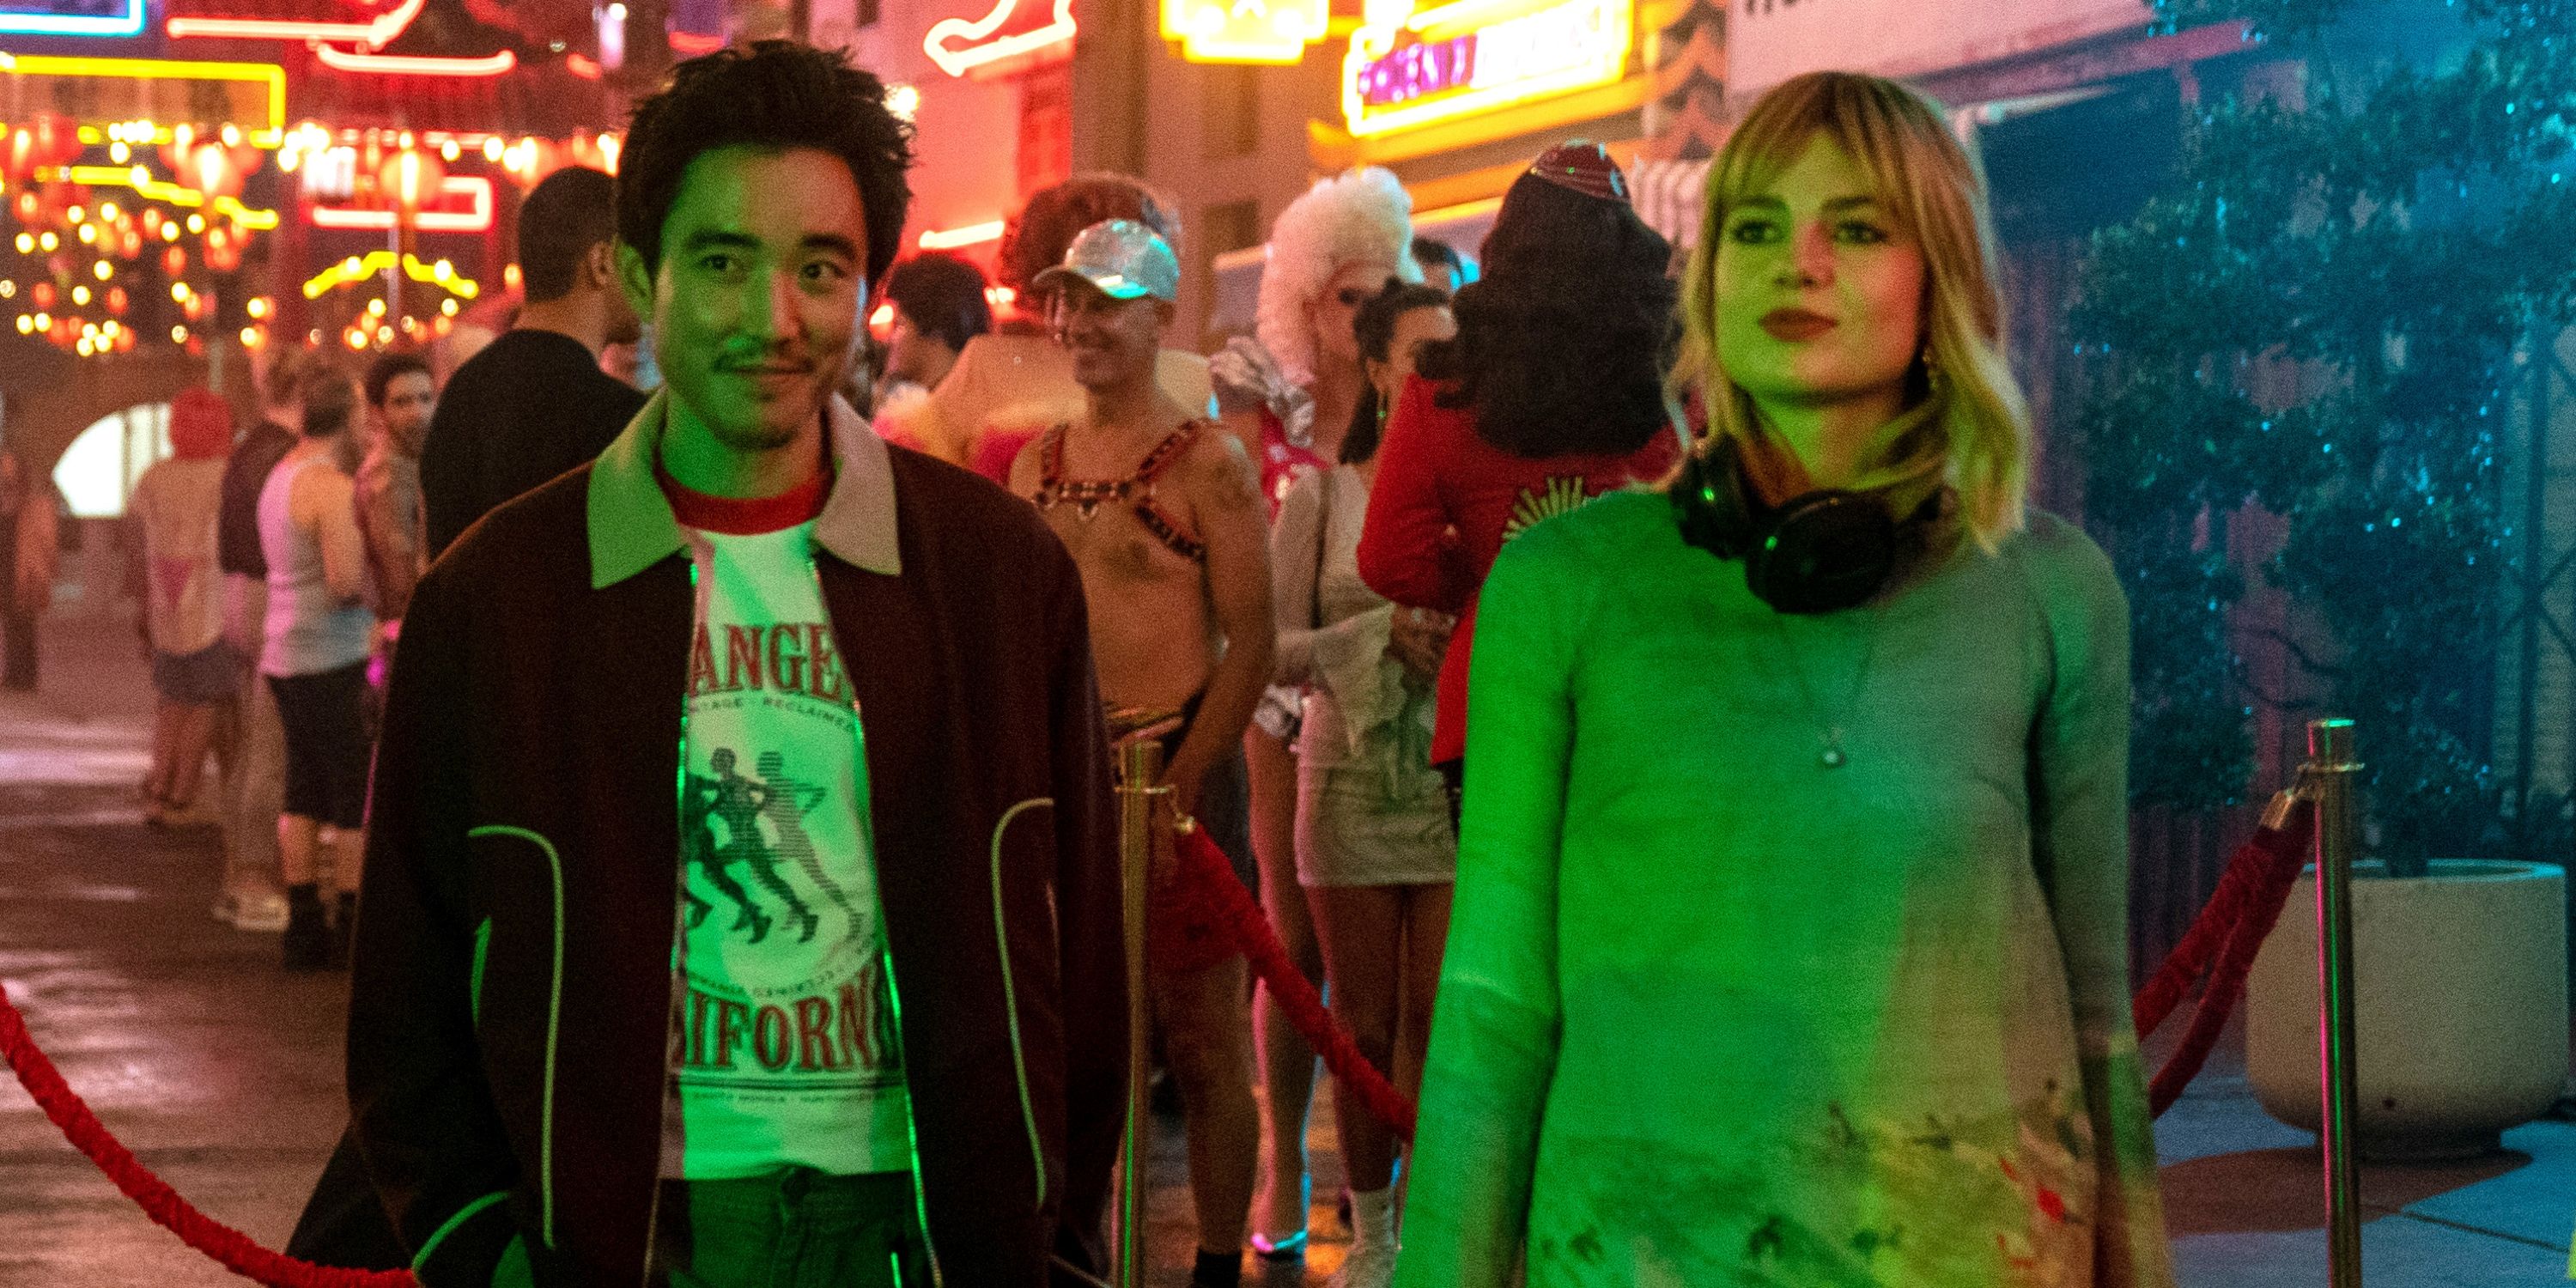 Lucy Boynton as Harriet with headphones on standing next to Justin H. Min as David in The Greatest Hits